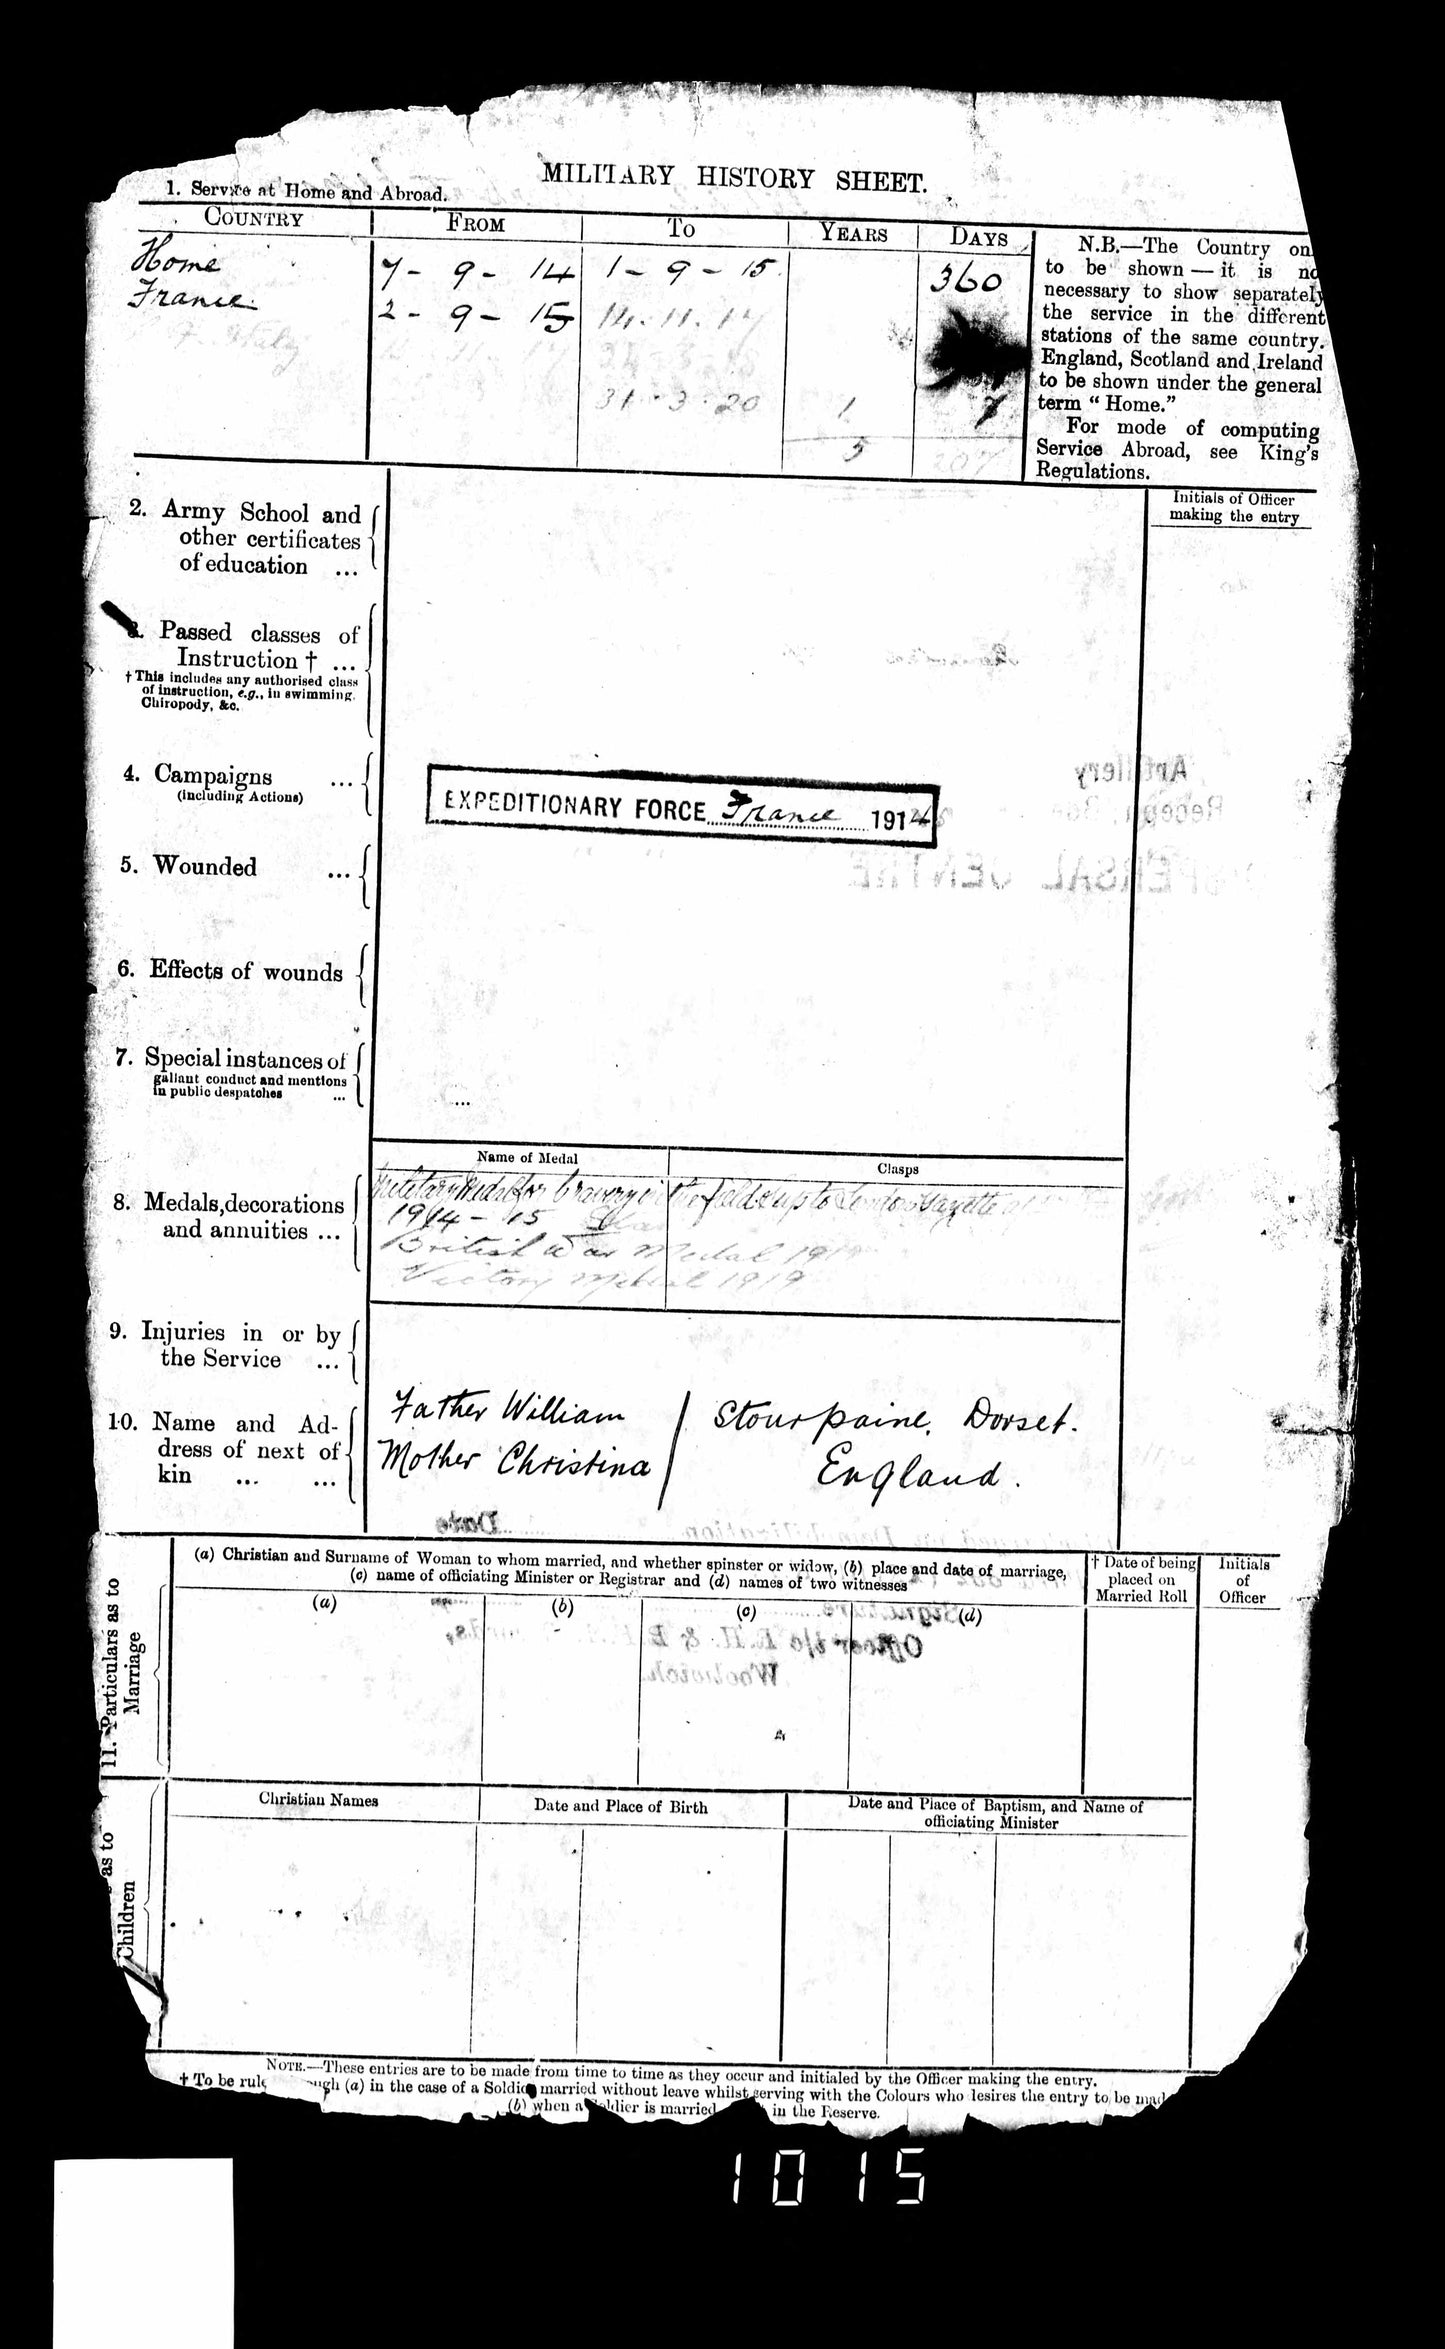 WW1 soldiers service record